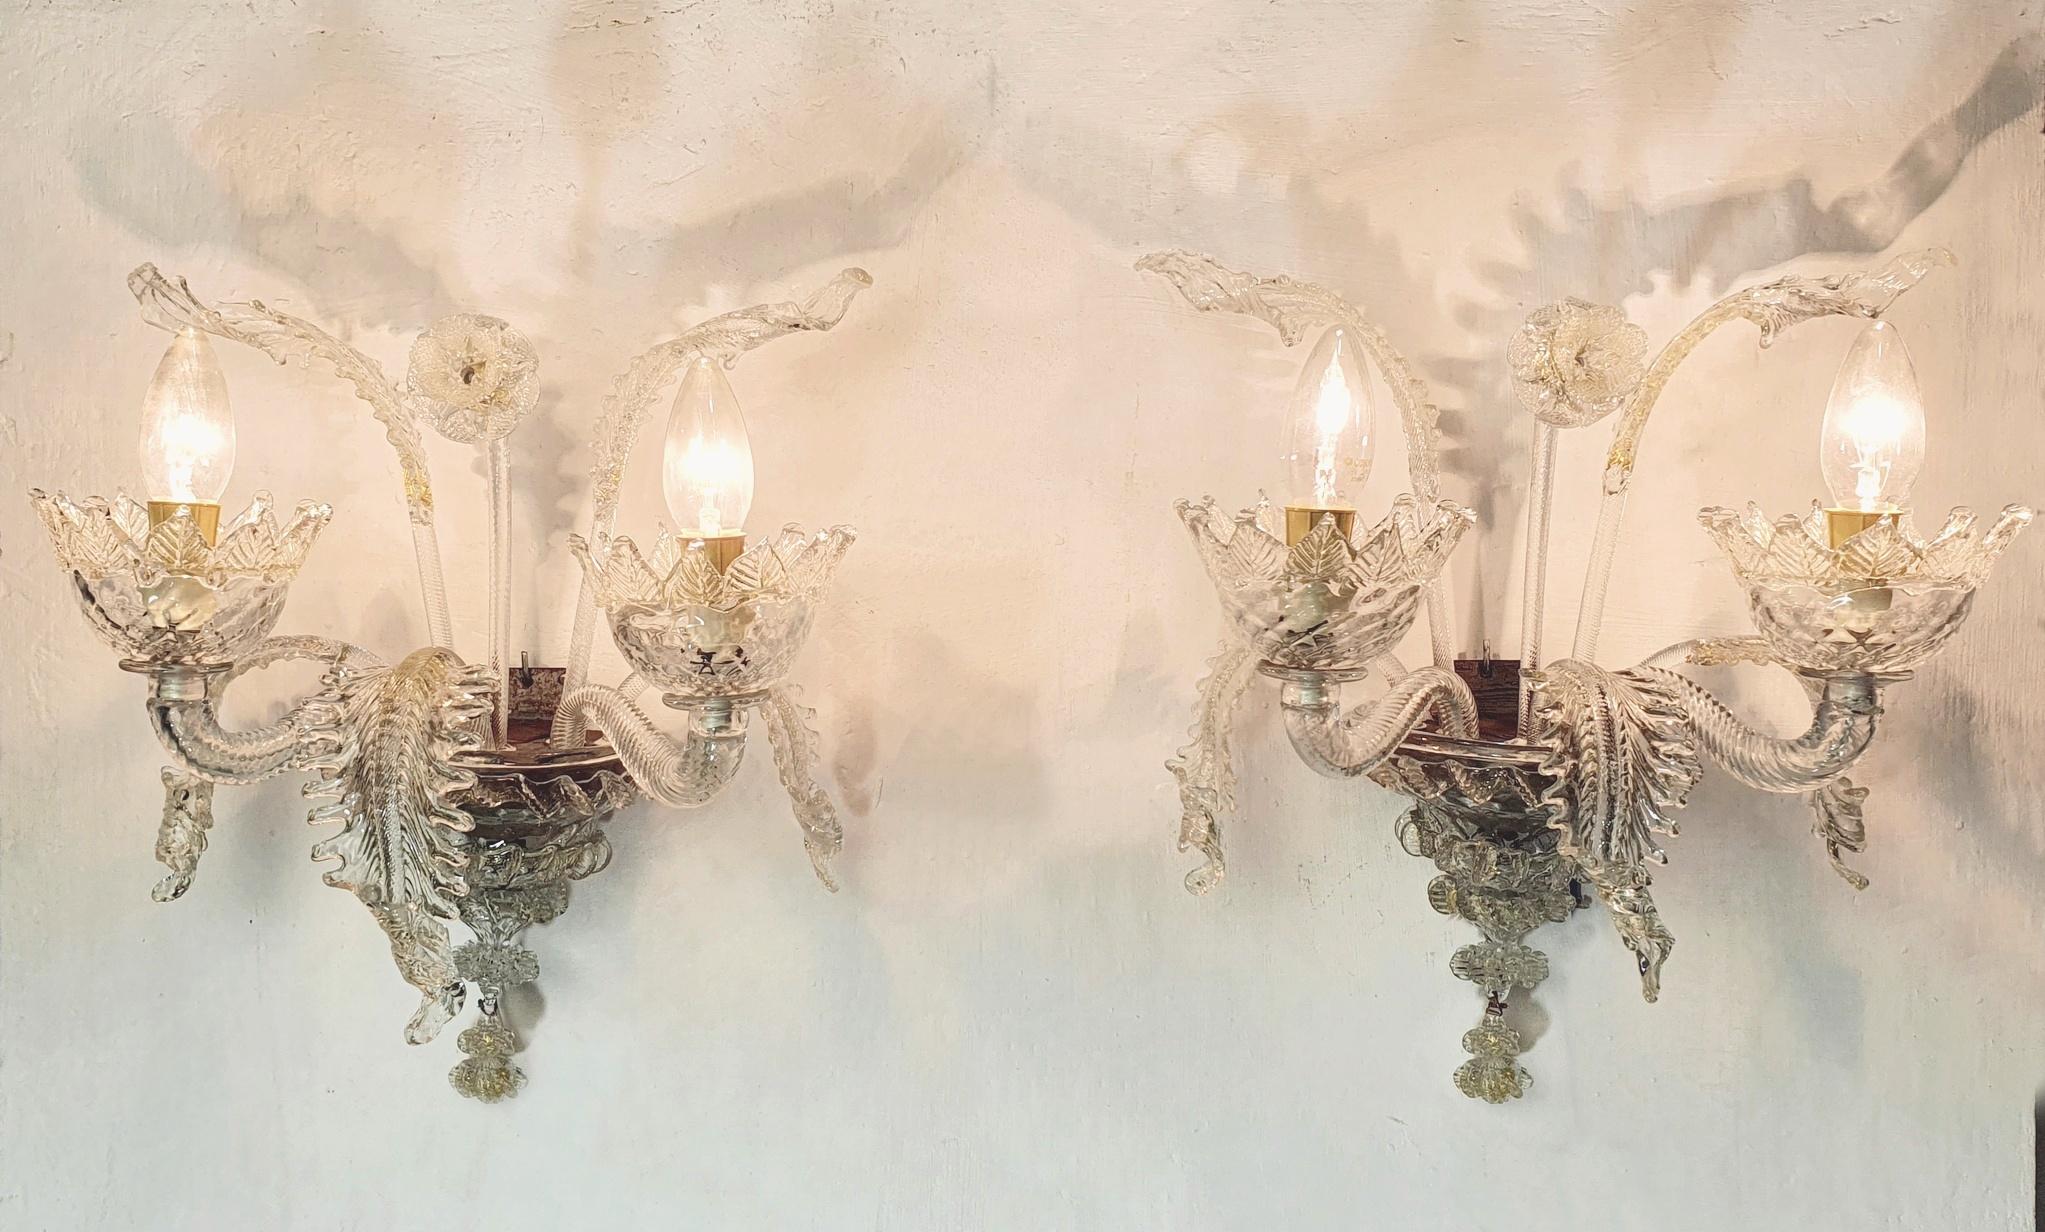 A nice pair of classic Murano sconces in Venetian style in clear glass with gold specks giving the light a nice shimmer.  There is a flower in the middle of each sconce as well as five curled leaves. The sconces surrounding the lightbulb have a wide